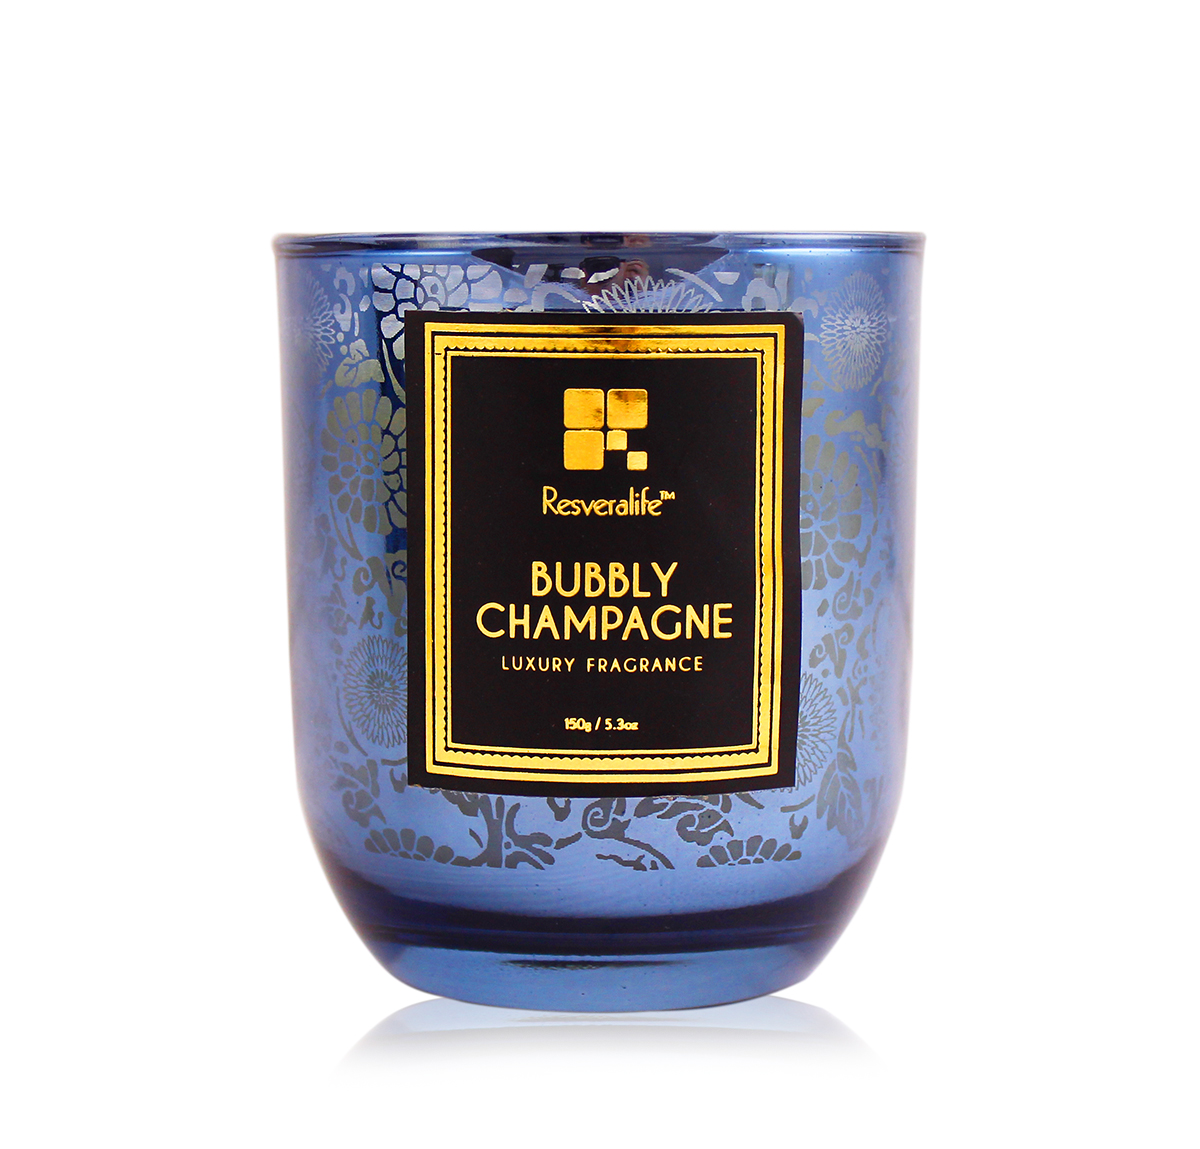 Resveralife Bubbly Champagne Candle